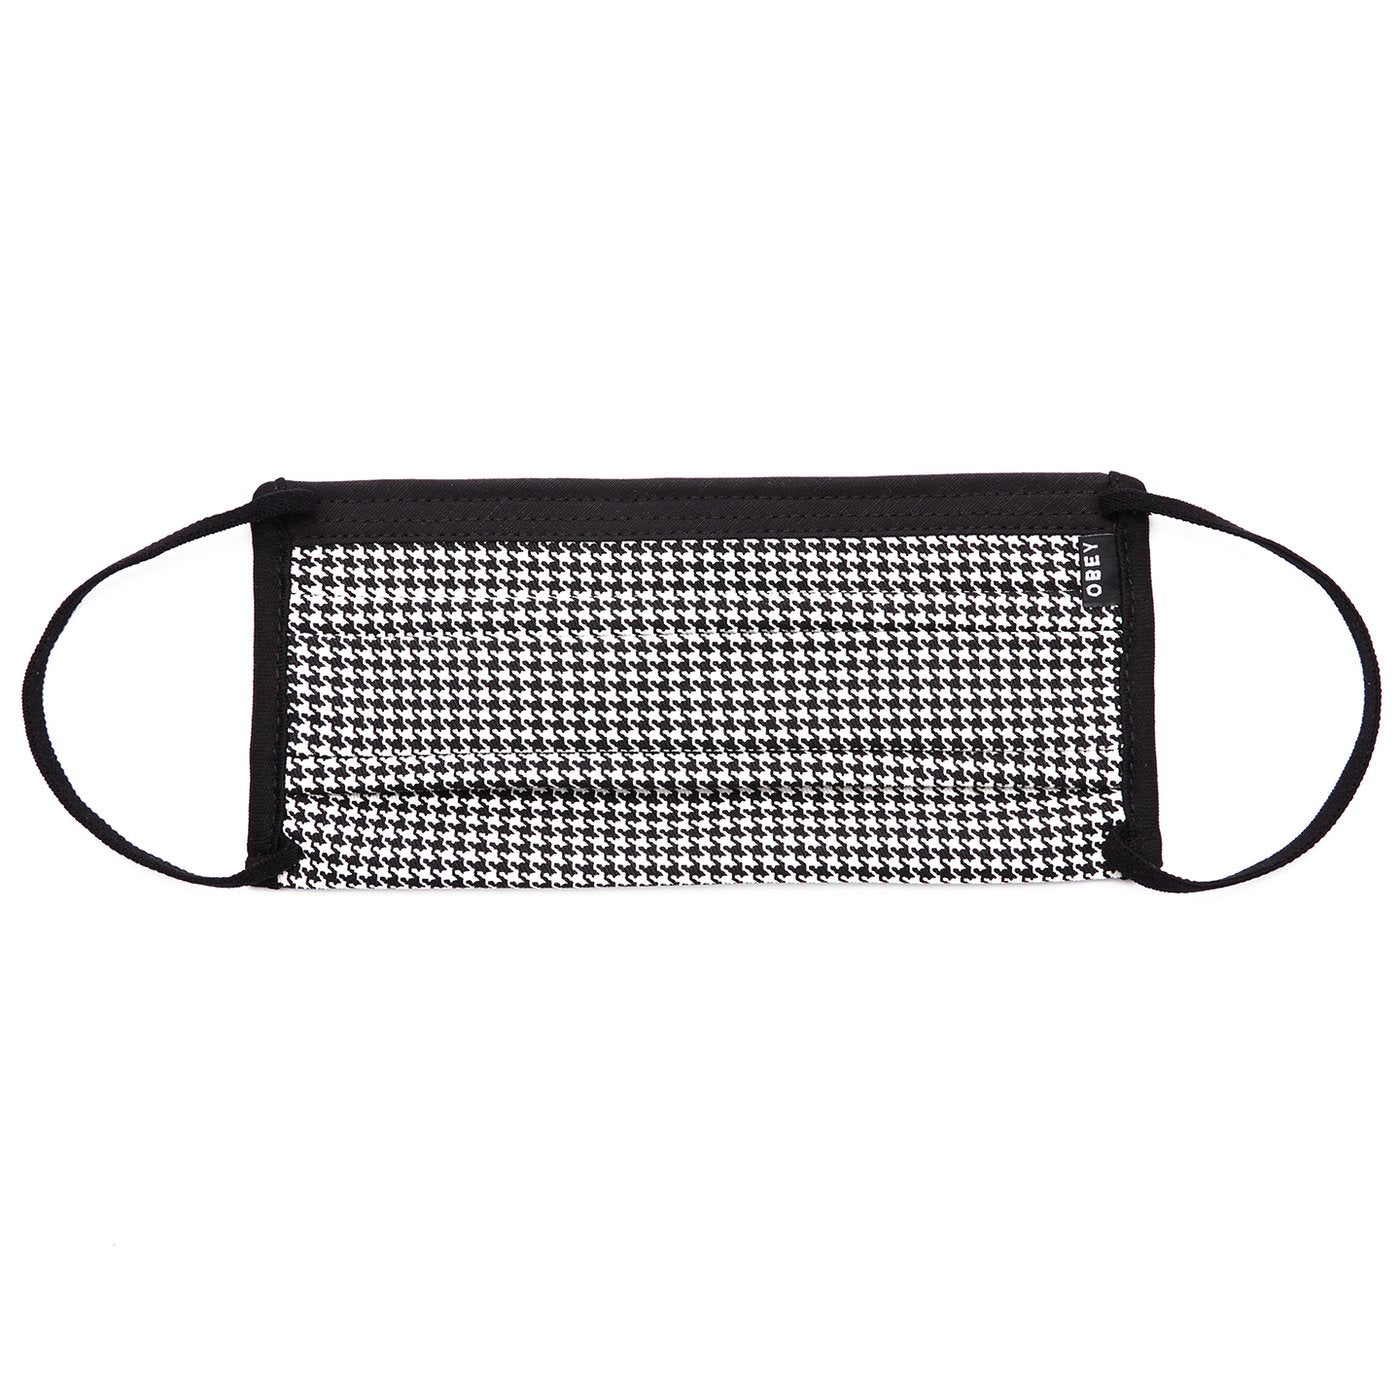 OBEY - Creeper Mask, Black White Houndstooth